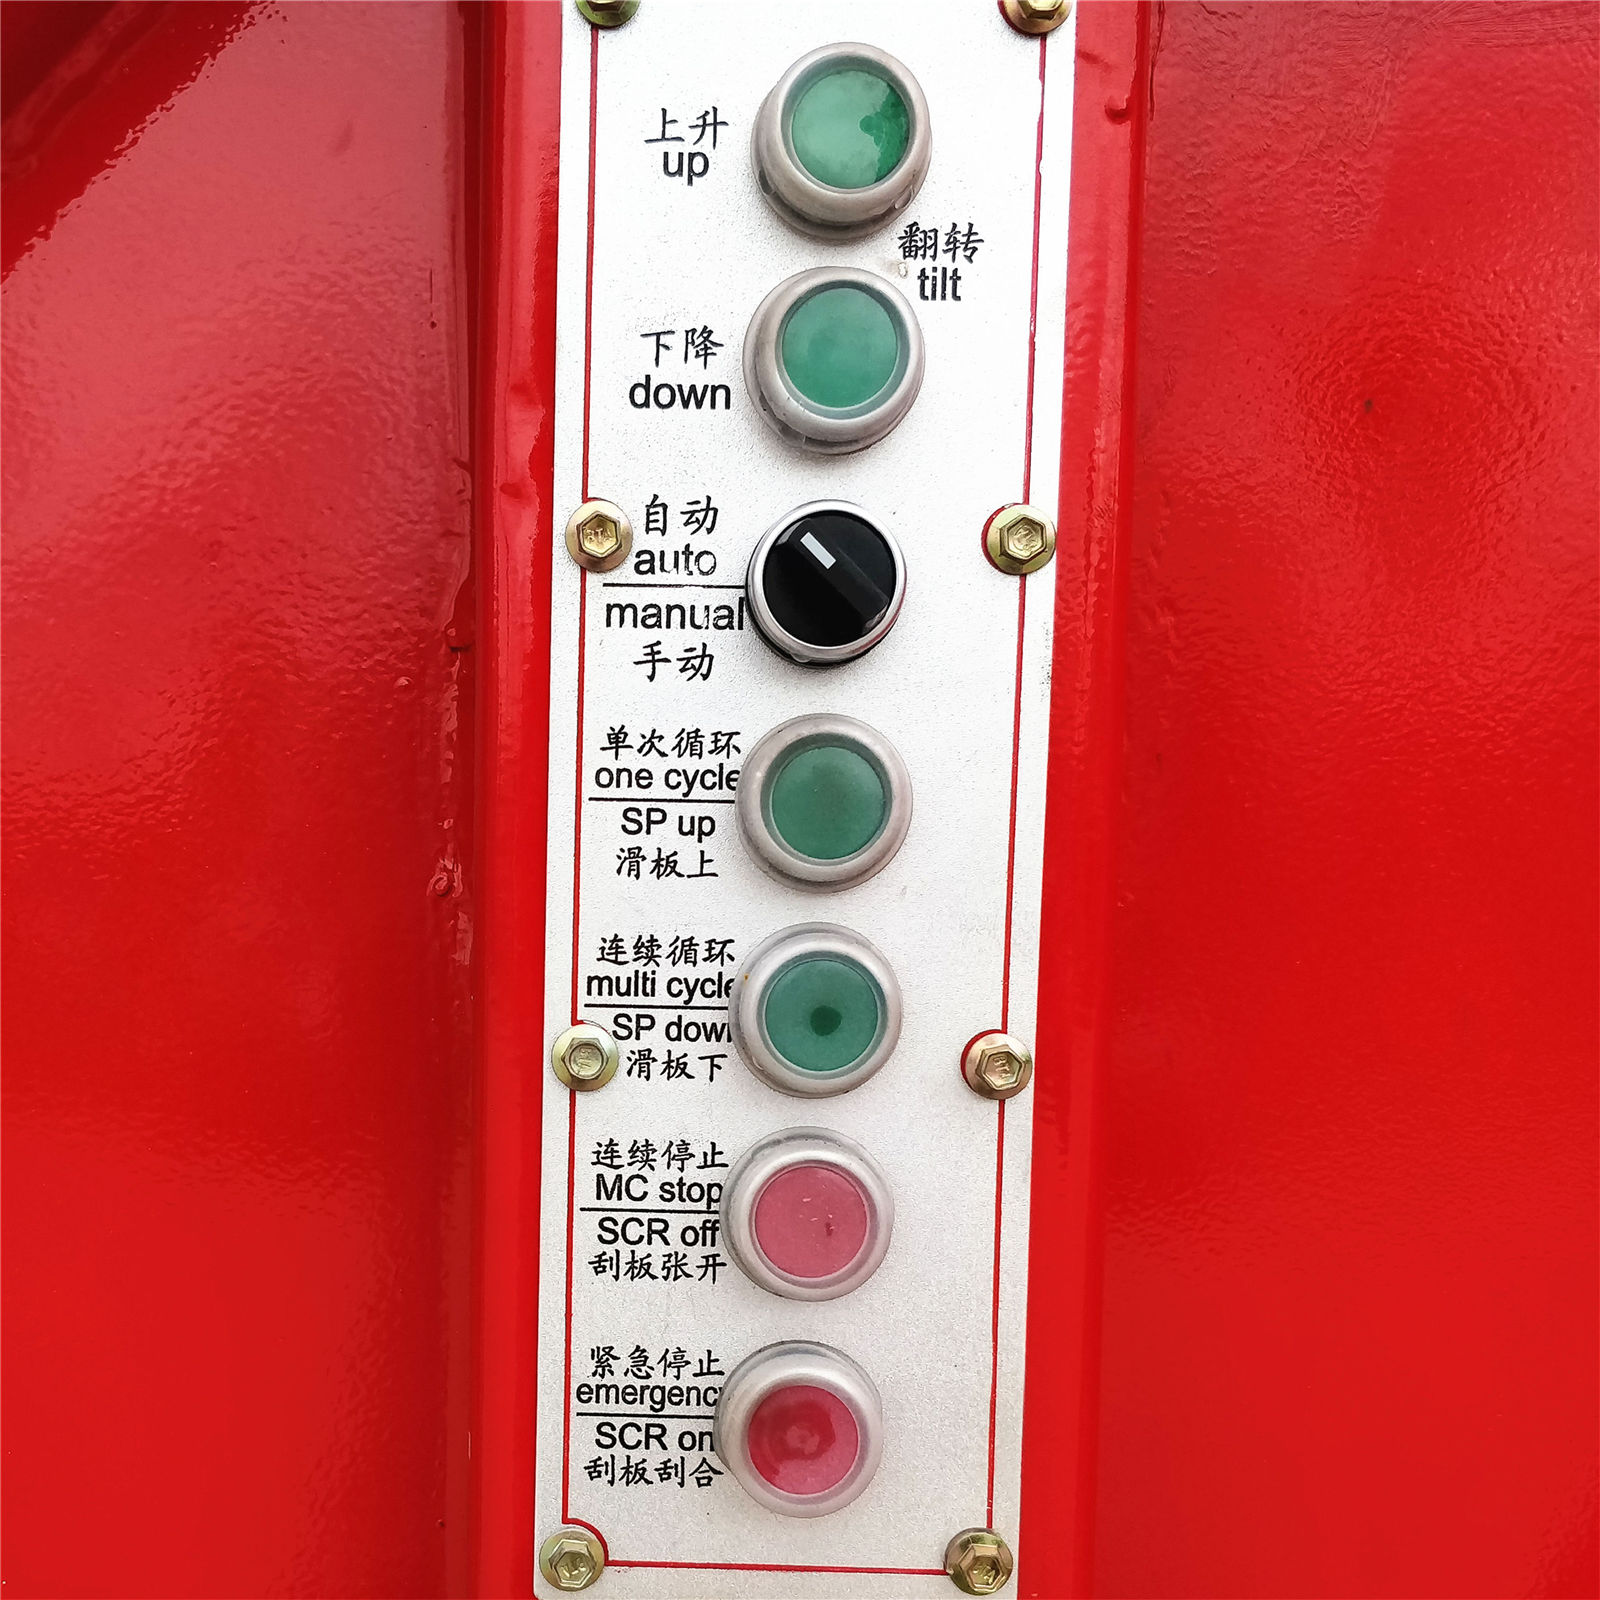 Normal unknown brand electric control box